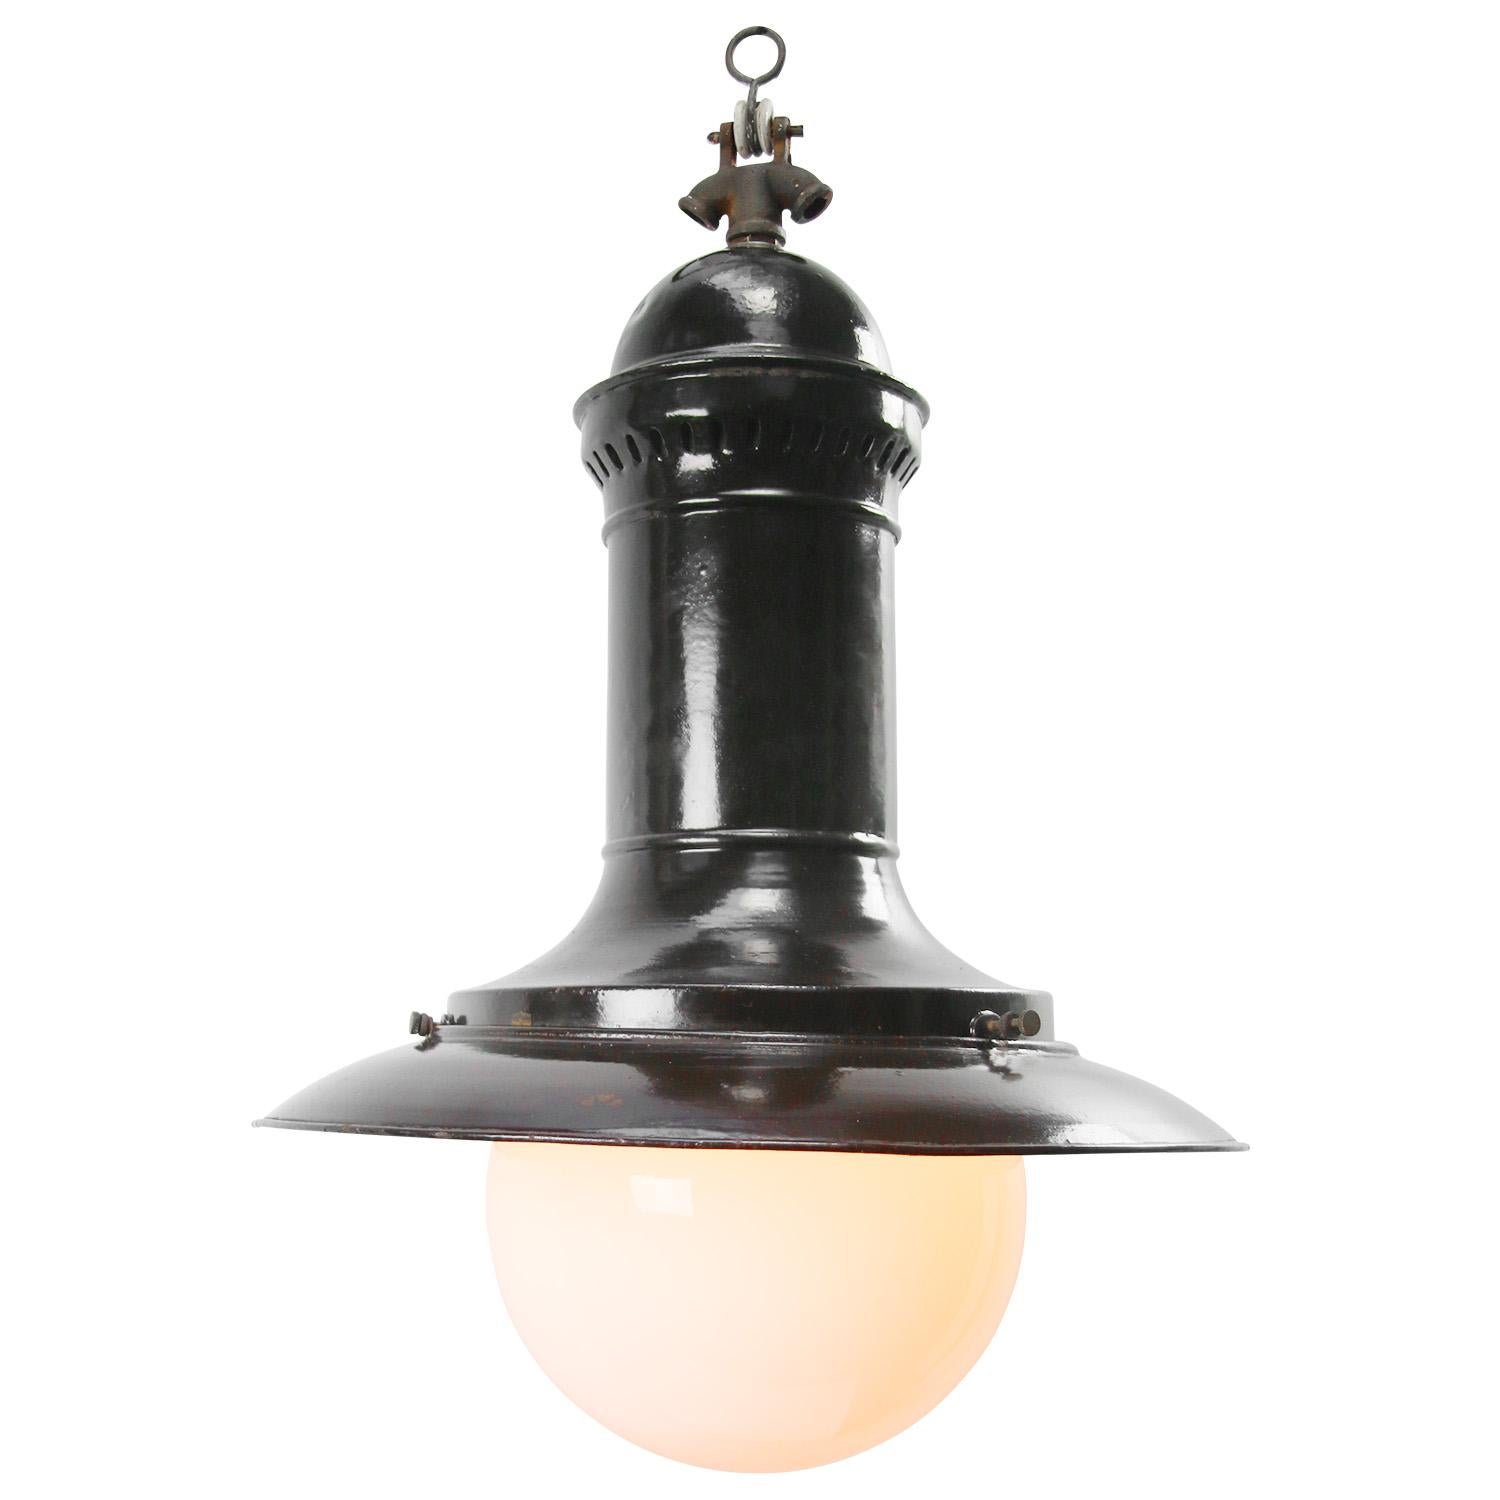 German, 1920s, black enamel factory pendant light.
White opaline glass. Cast iron top.

Measures: weight 3.20 kg / 7.1 lb

Priced per individual item. All lamps have been made suitable by international standards for incandescent light bulbs,